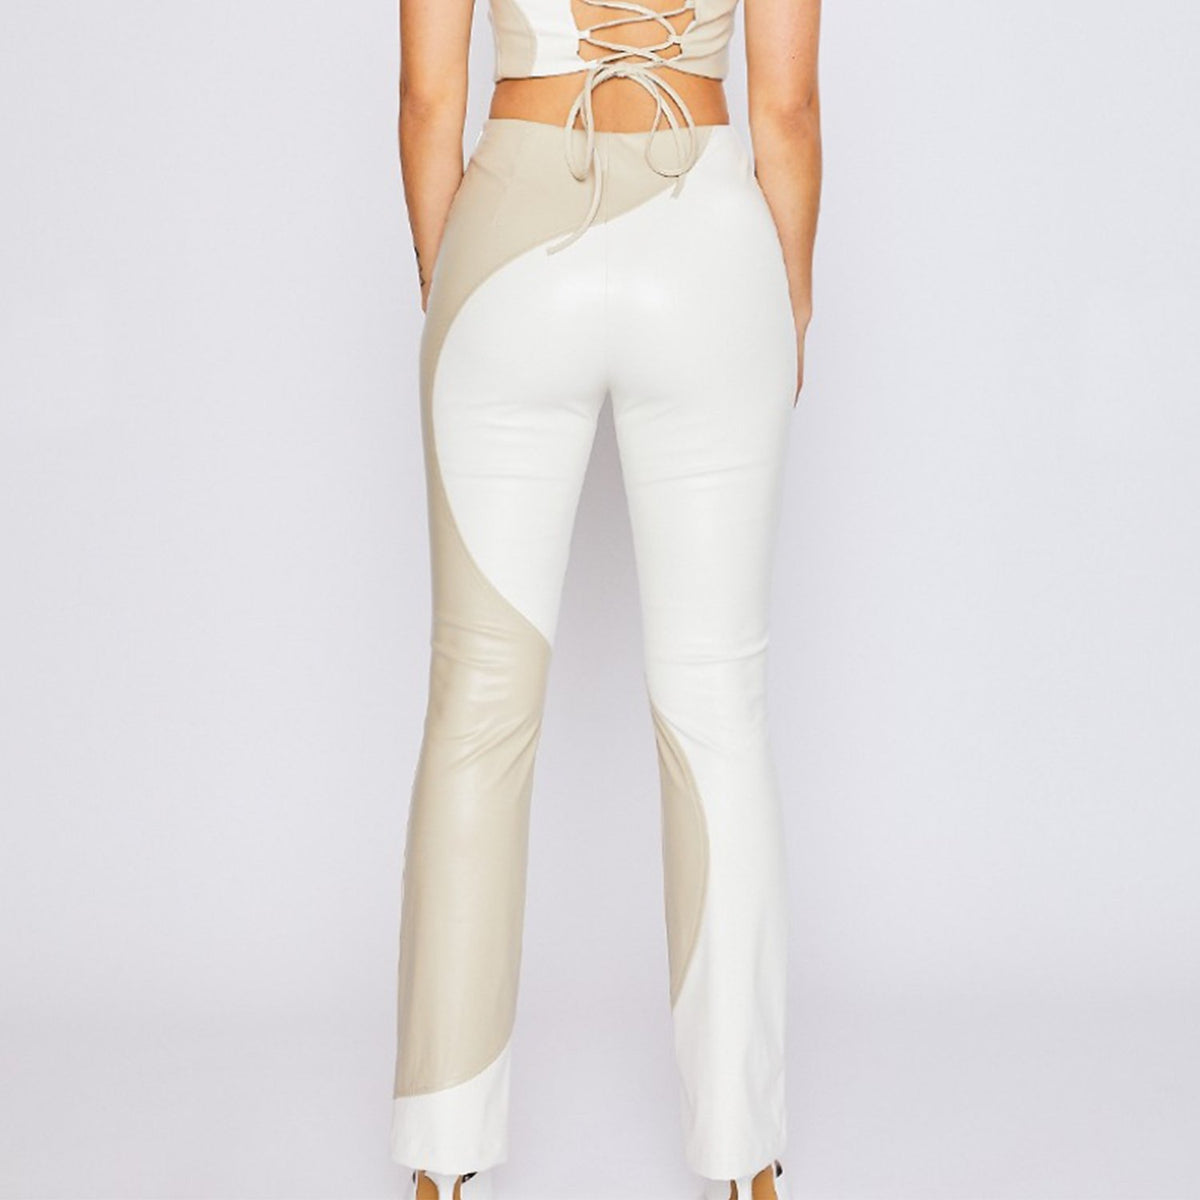 Kendra Color Block Leather Pants